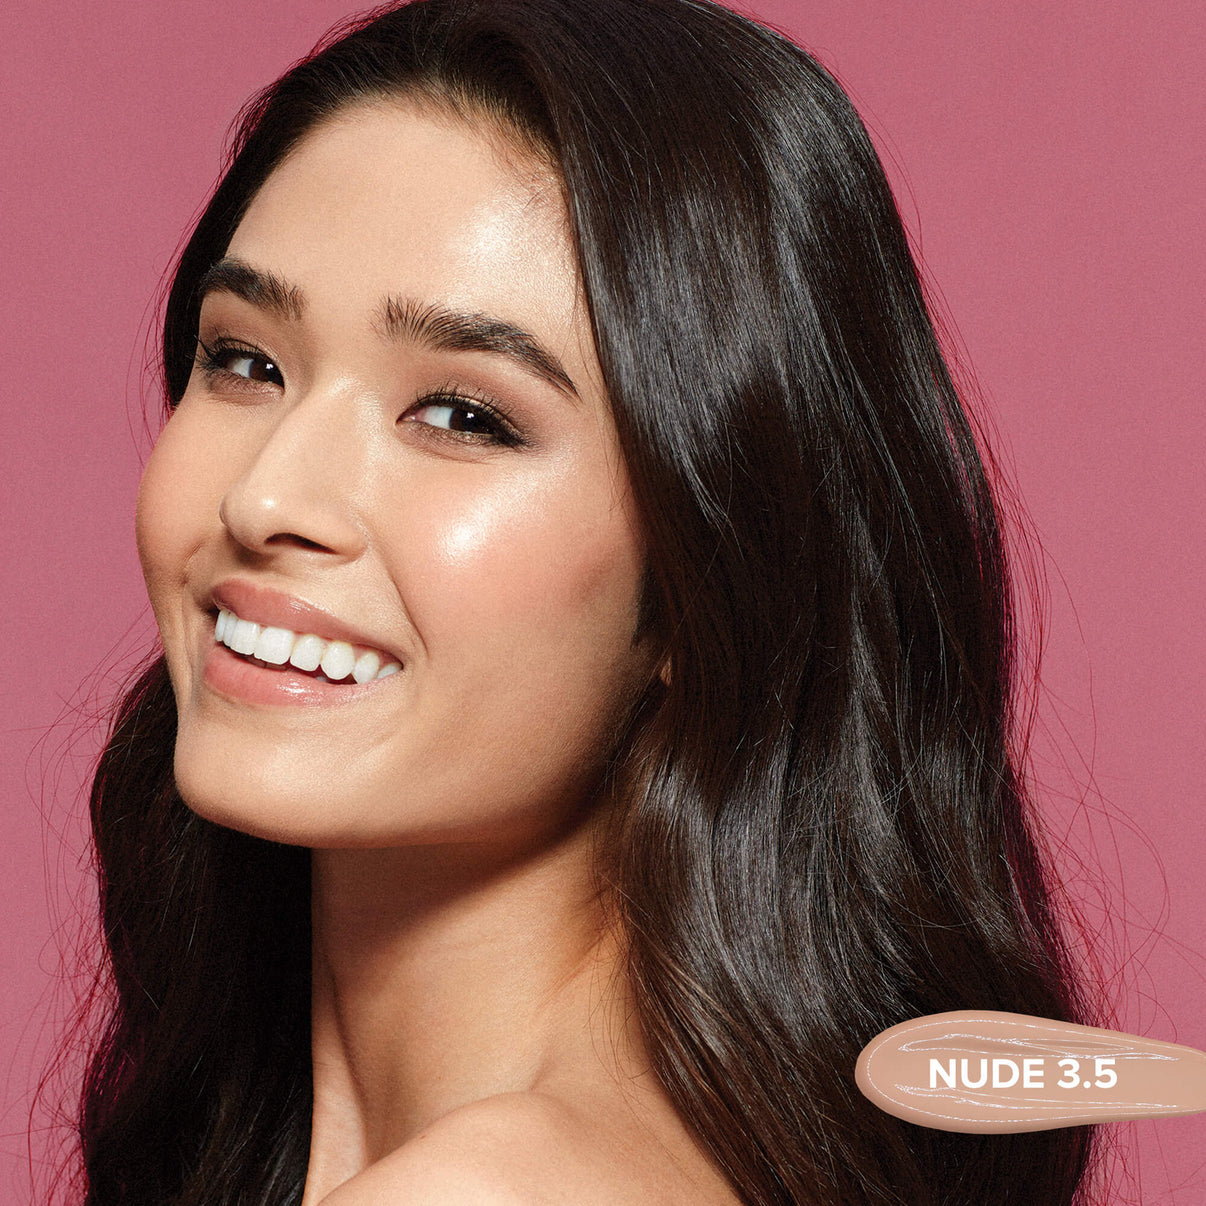 Young woman wearing Tinted Cover Liquid Foundation in shade nude 3.5